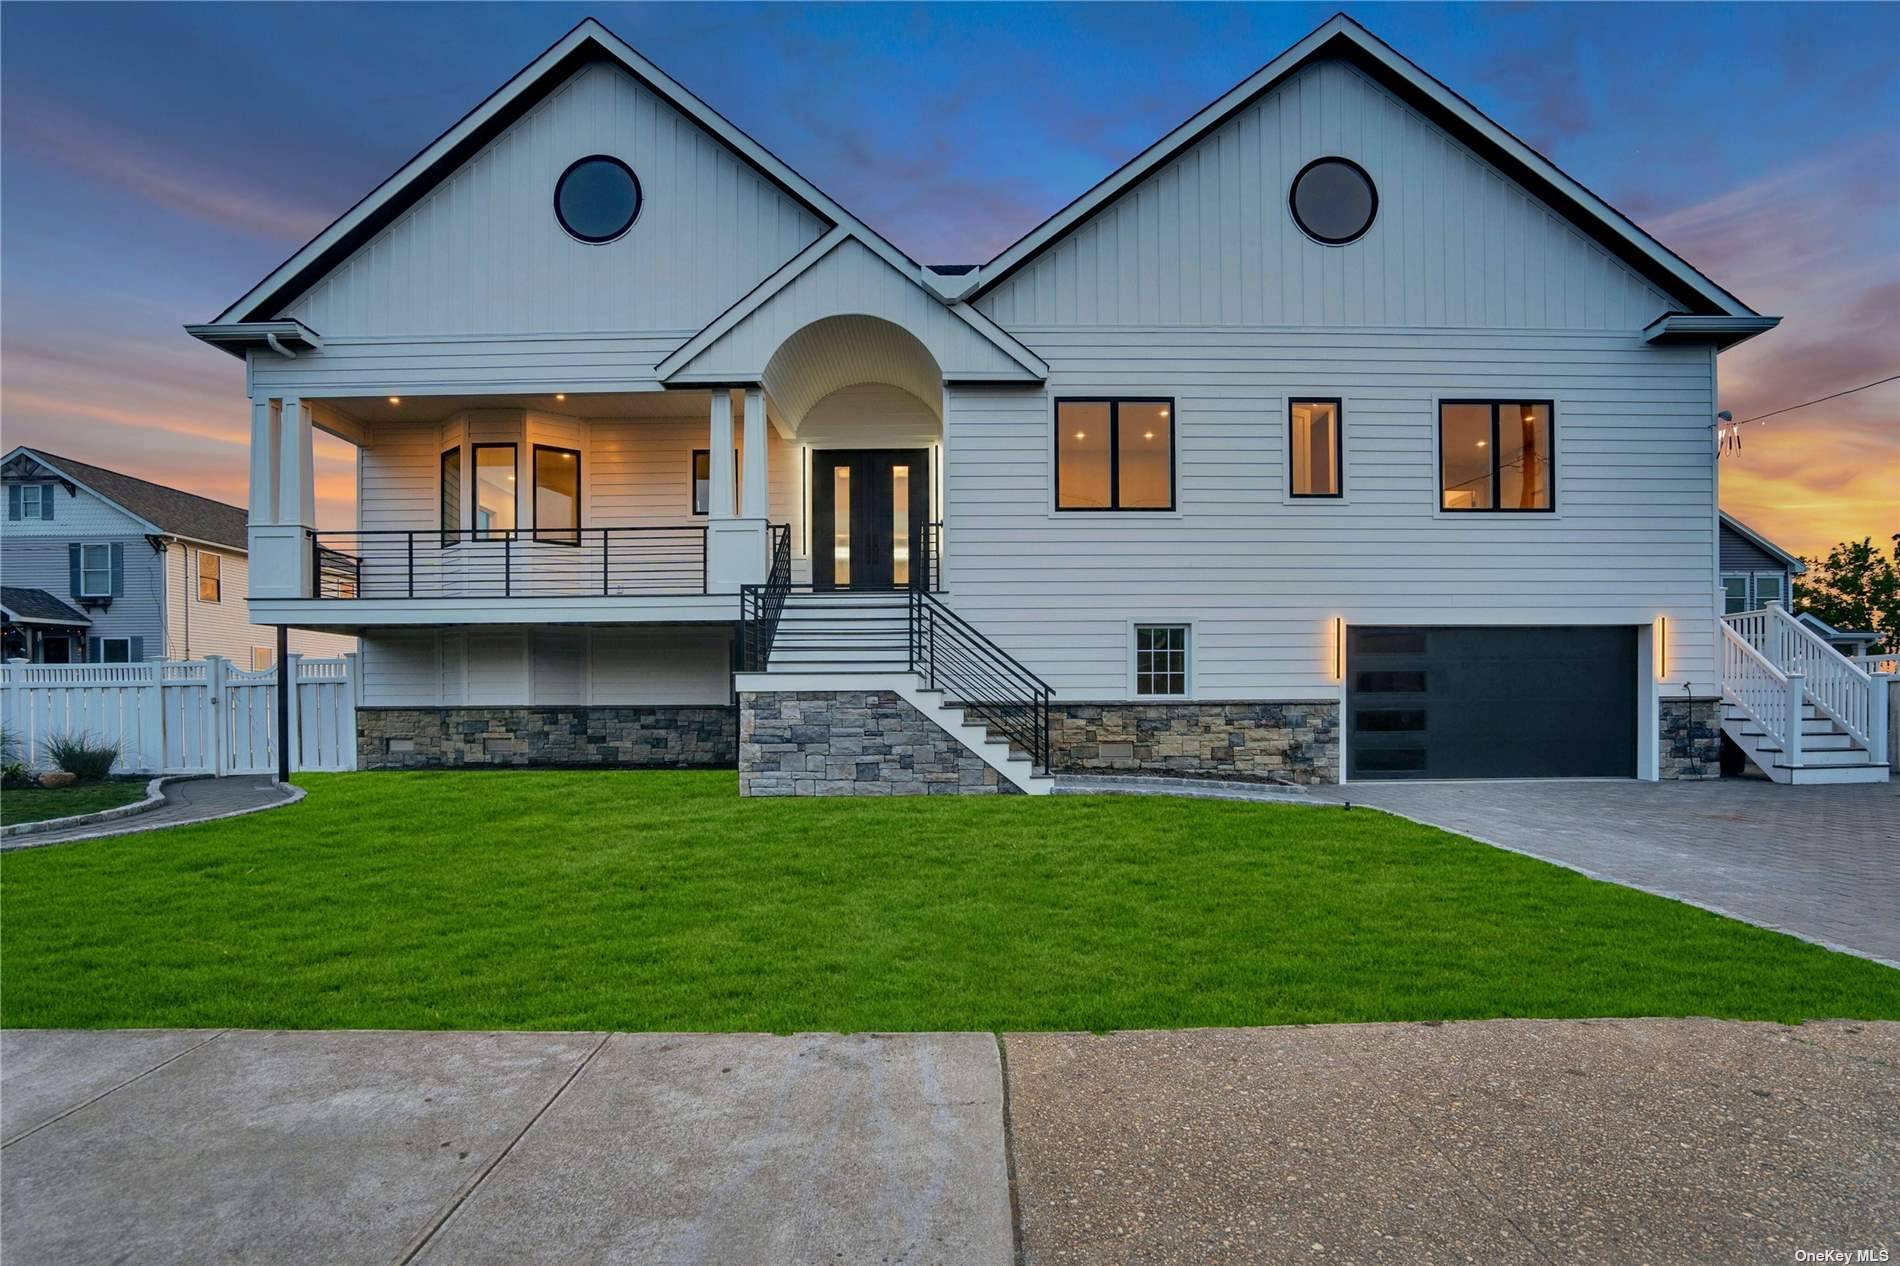 Freeport. Sitting on one of the largest waterfront lots in South Freeport, this brand new construction home offers impeccable design amp ; craftsmanship with western water views for the perfect ...